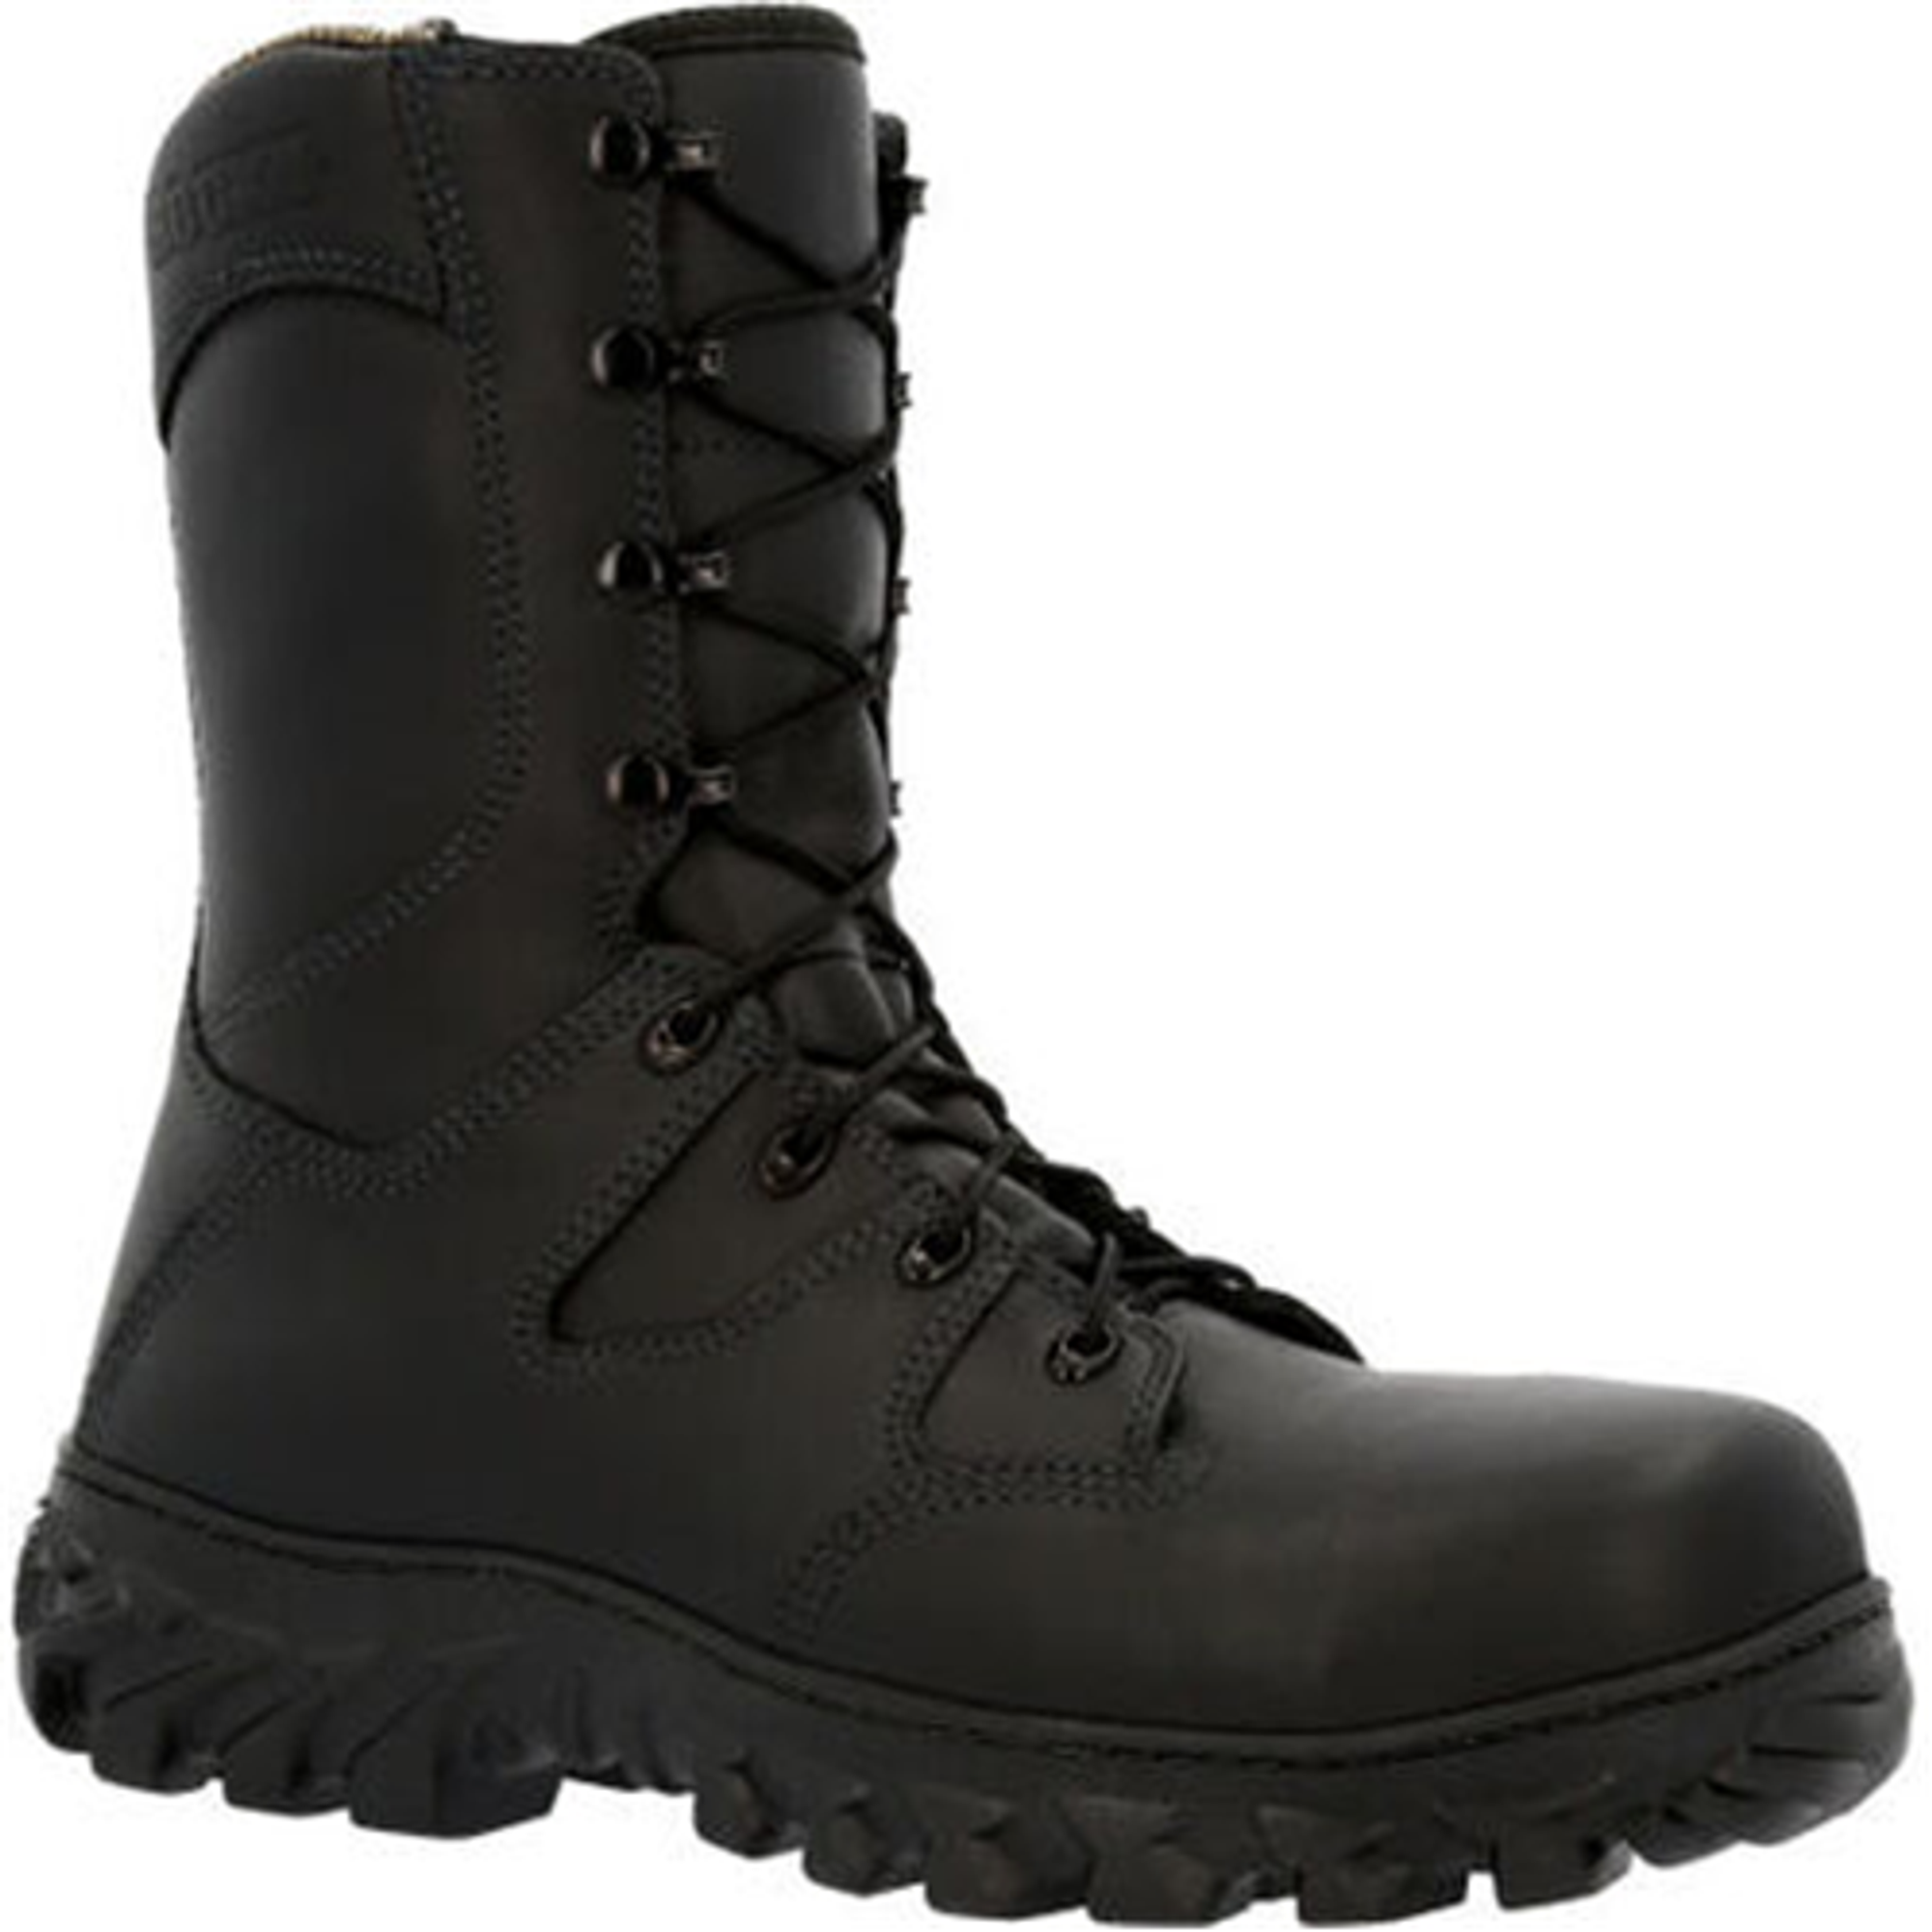 Rocky Code Red Rescue Fire Boot - KRRCK-RKD0086BK10M